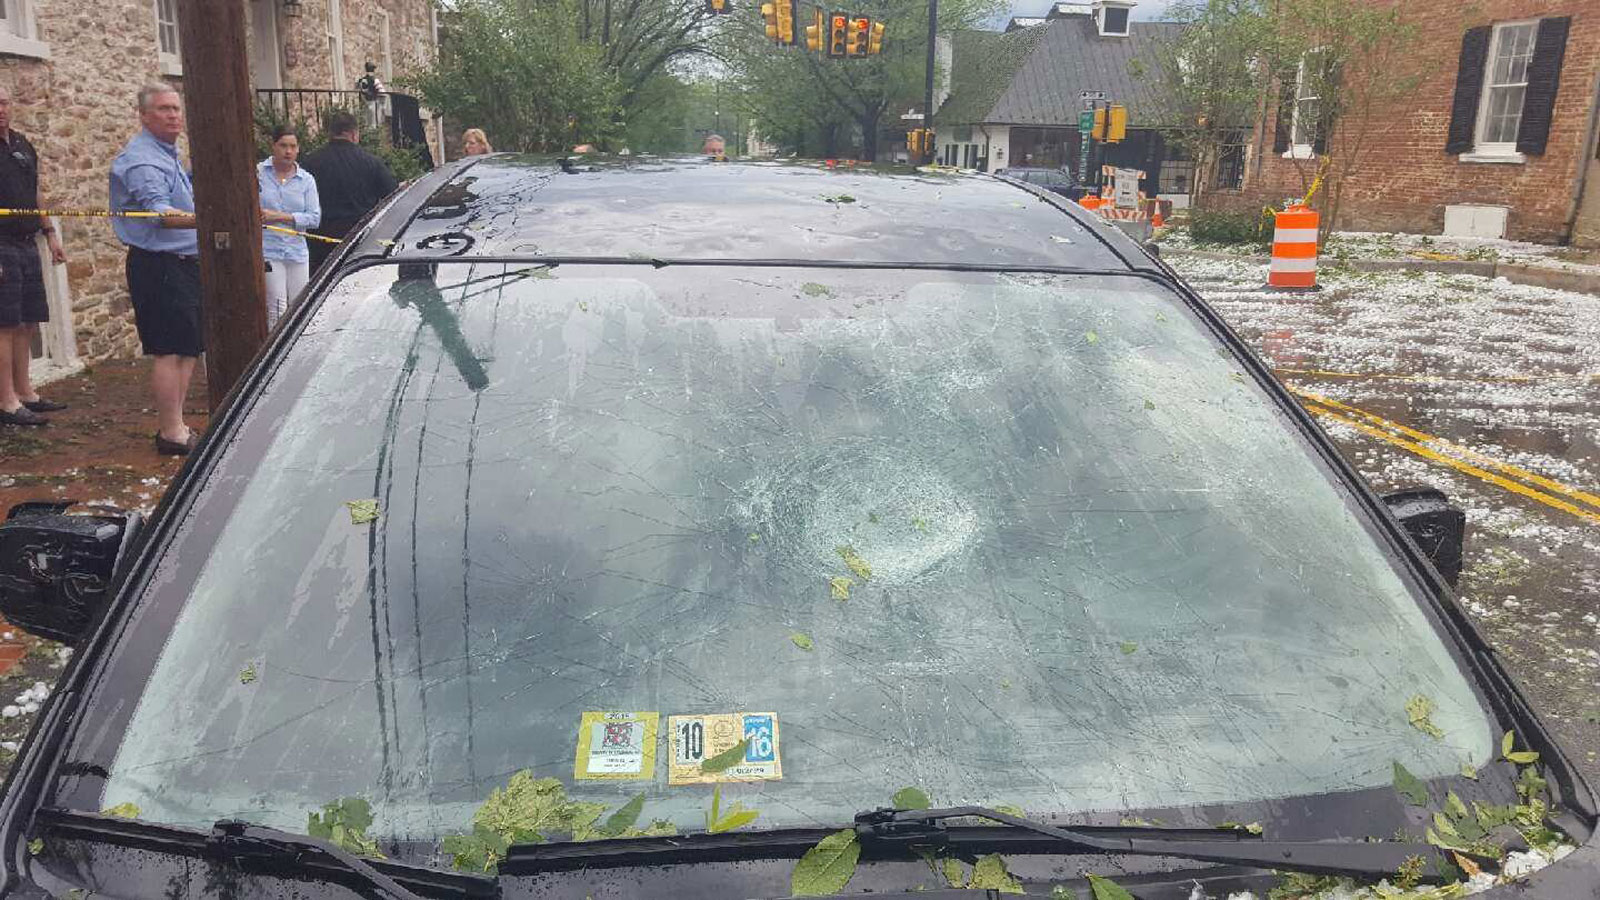 Hail damages a car outside the Red Fox Inn in Middleburg, Virginia on June 16, 2016. (Image sent in to talkback@WTOP.com)